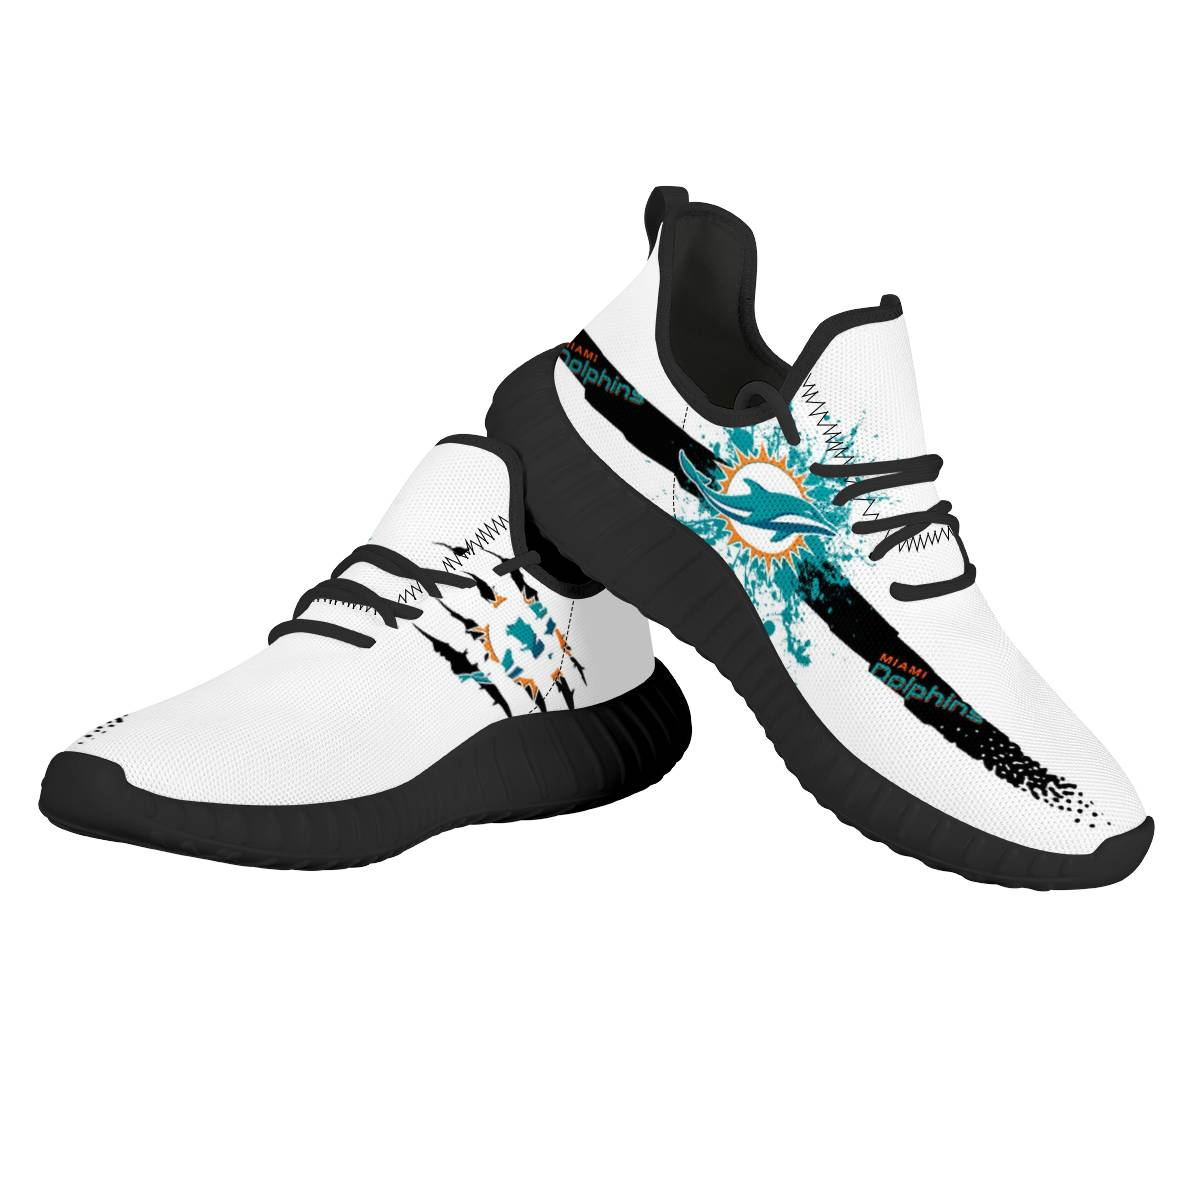 Men's NFL Miami Dolphins Mesh Knit Sneakers/Shoes 003